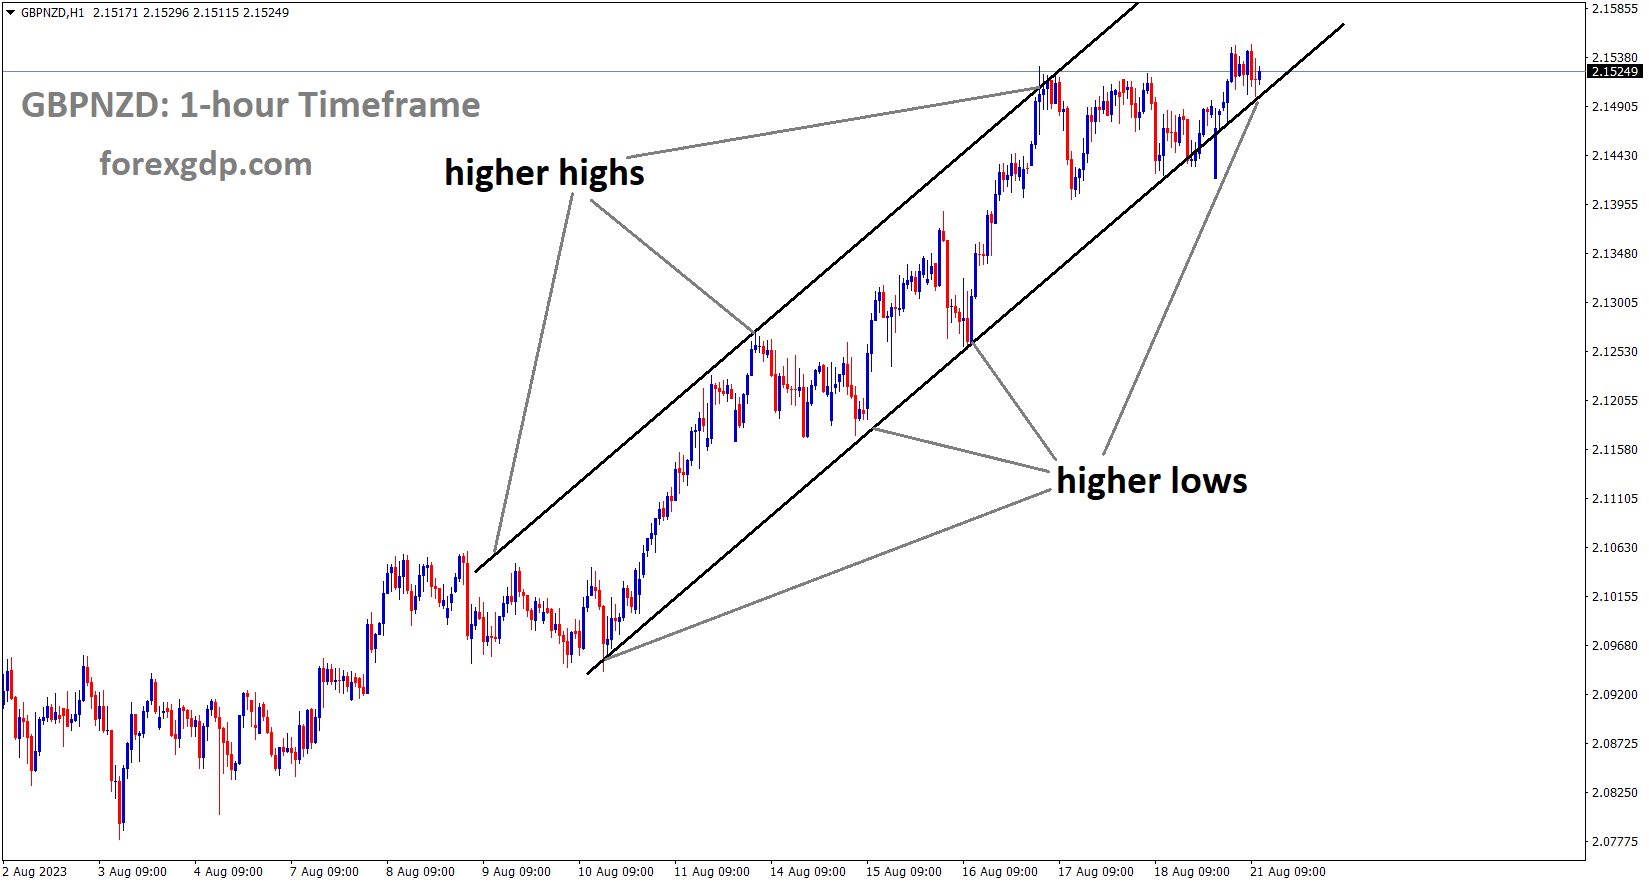 GBPNZD is moving in an Ascending channel and the market has reached the higher high area of the channel